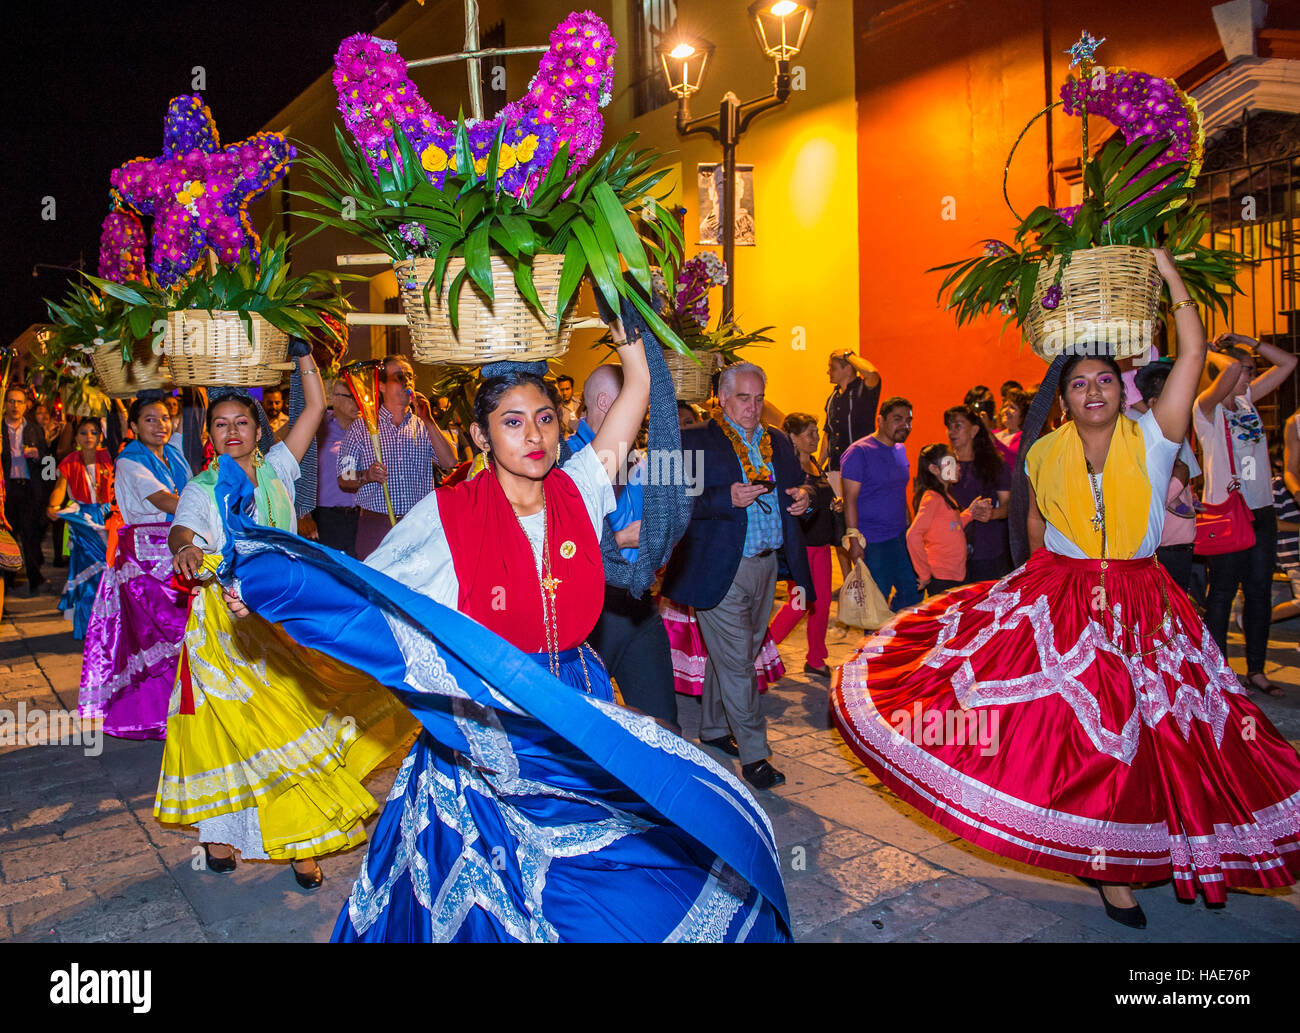 Participants on a carnival of the Day of the Dead in Oaxaca, Mexico Stock Photo